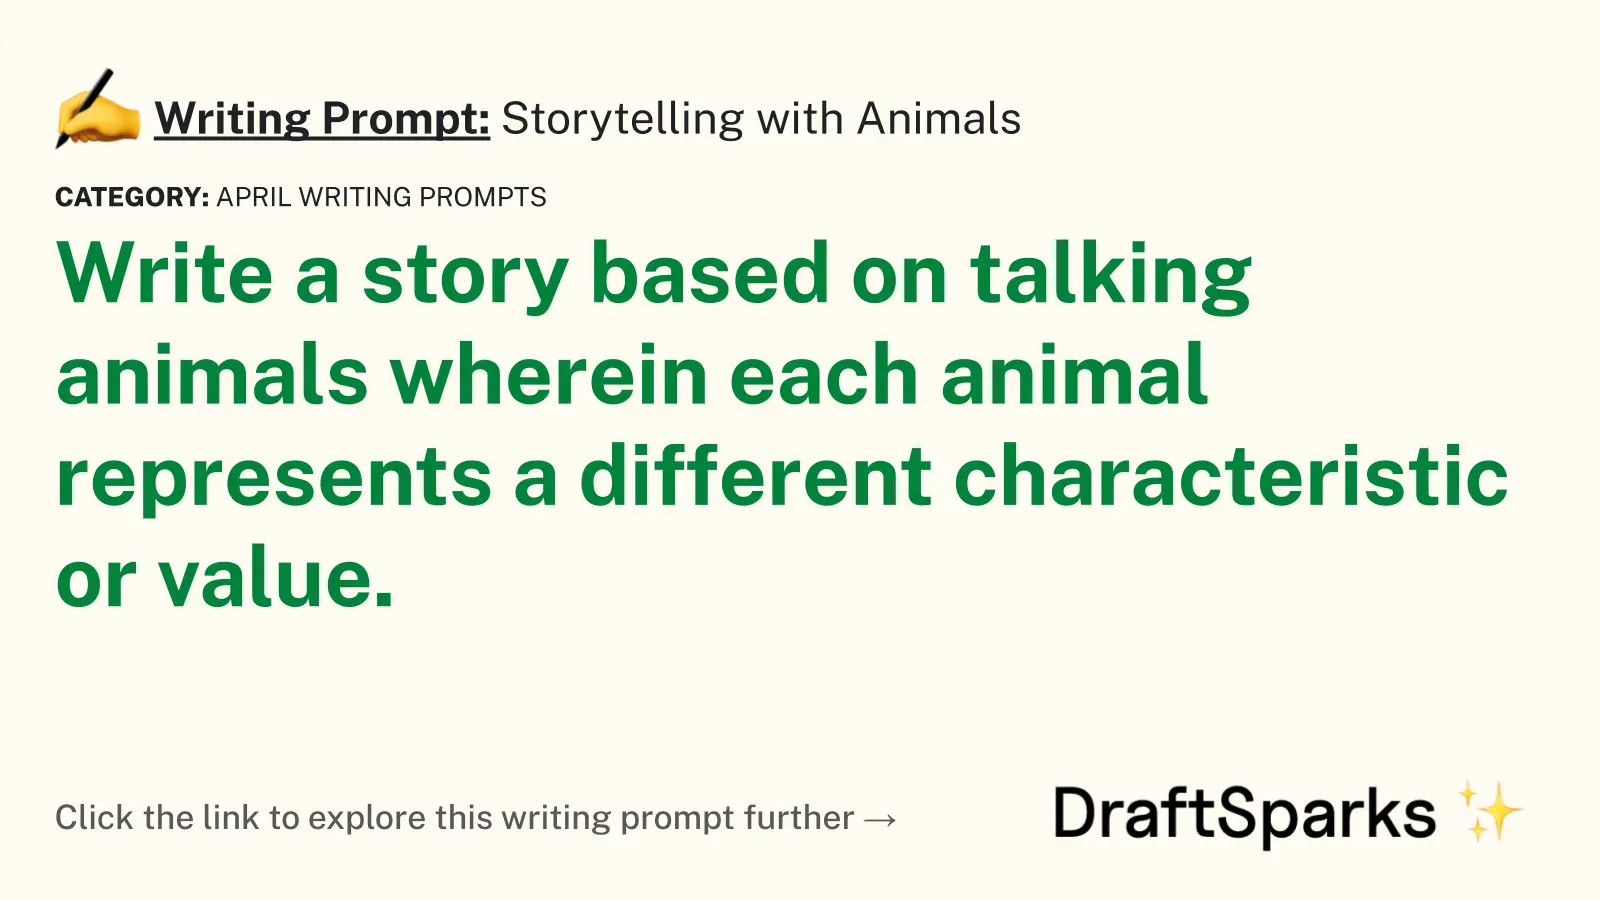 Storytelling with Animals